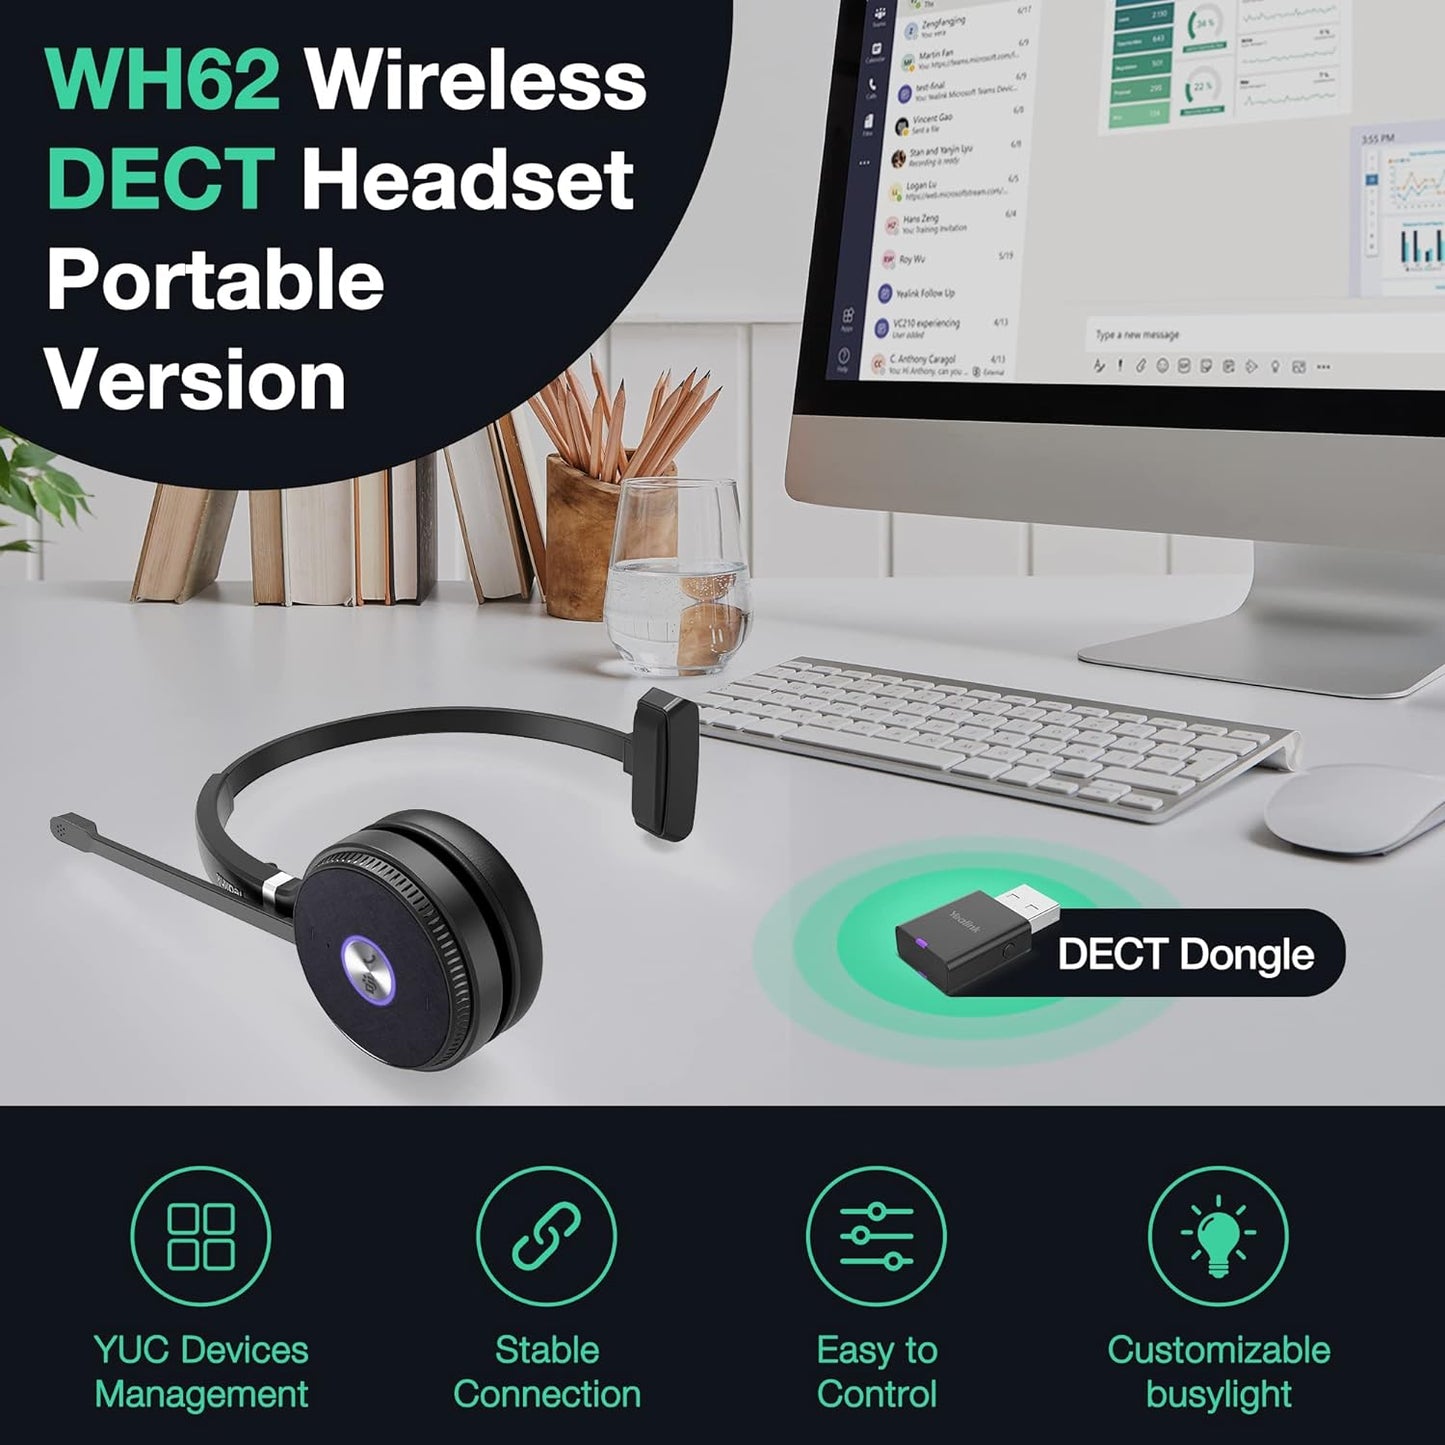 Yealink WH62 Wireless Headset with Microphone Ultra Portable DECT Headset Teams Teams & Zoom Certified Office Headphone with Noise Canceling Mic for Computer PC Laptop VoIP Phone SIP Phone